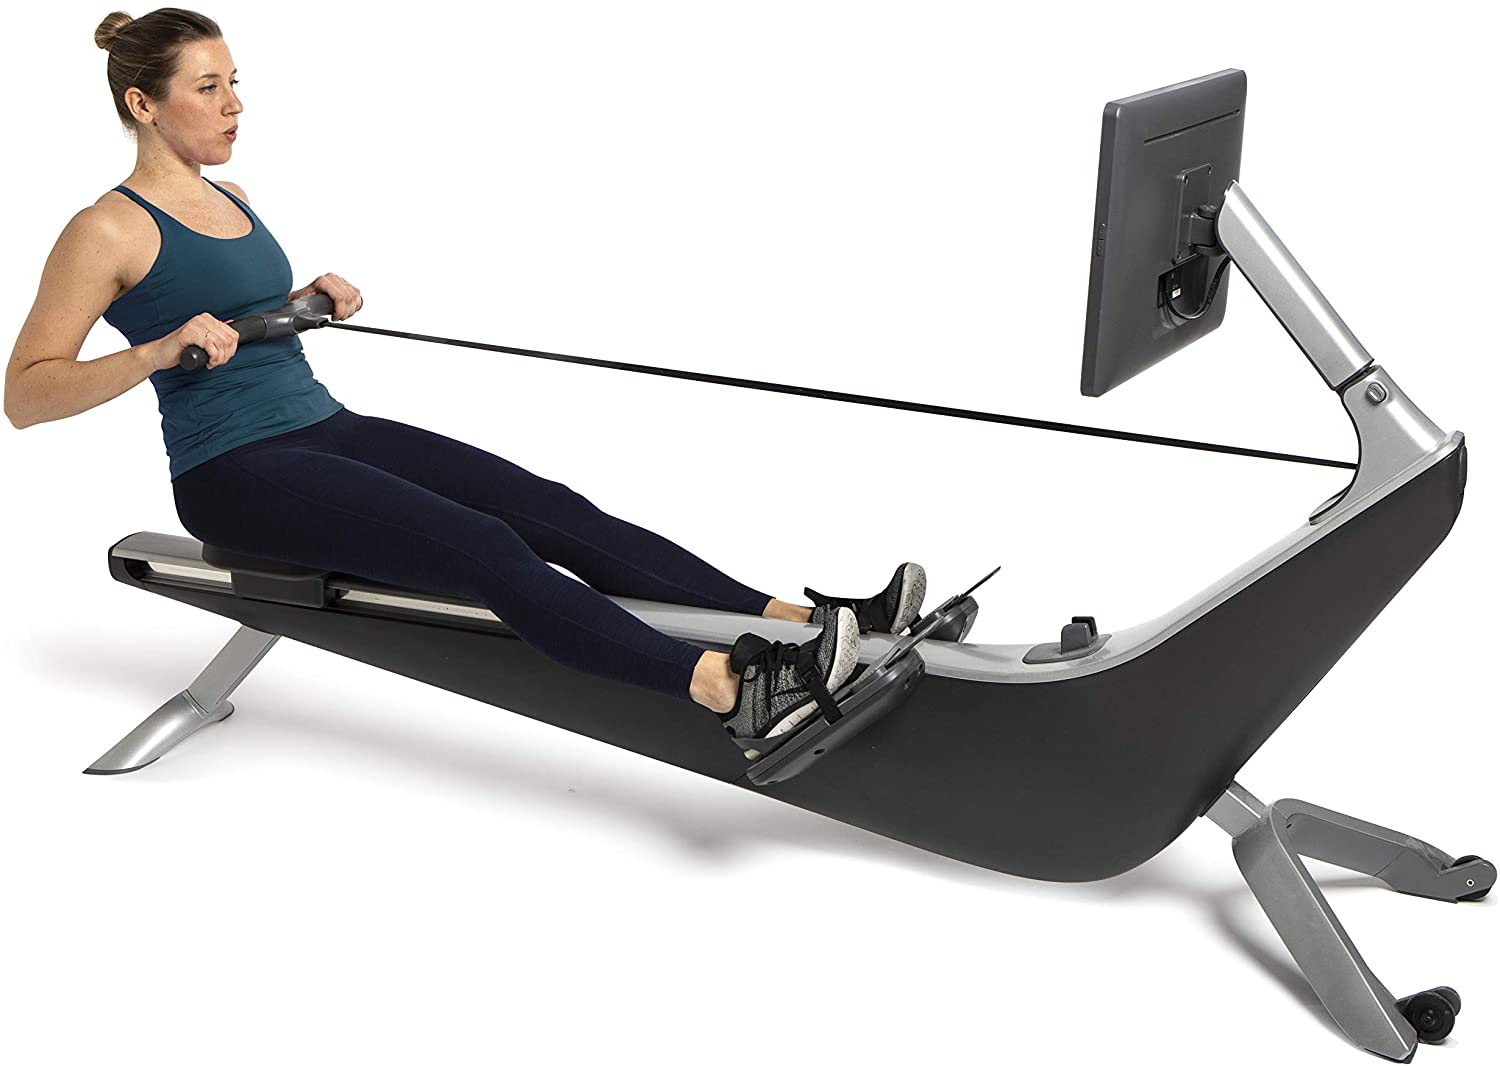 hydrow rowing machine electromagnetic resistance